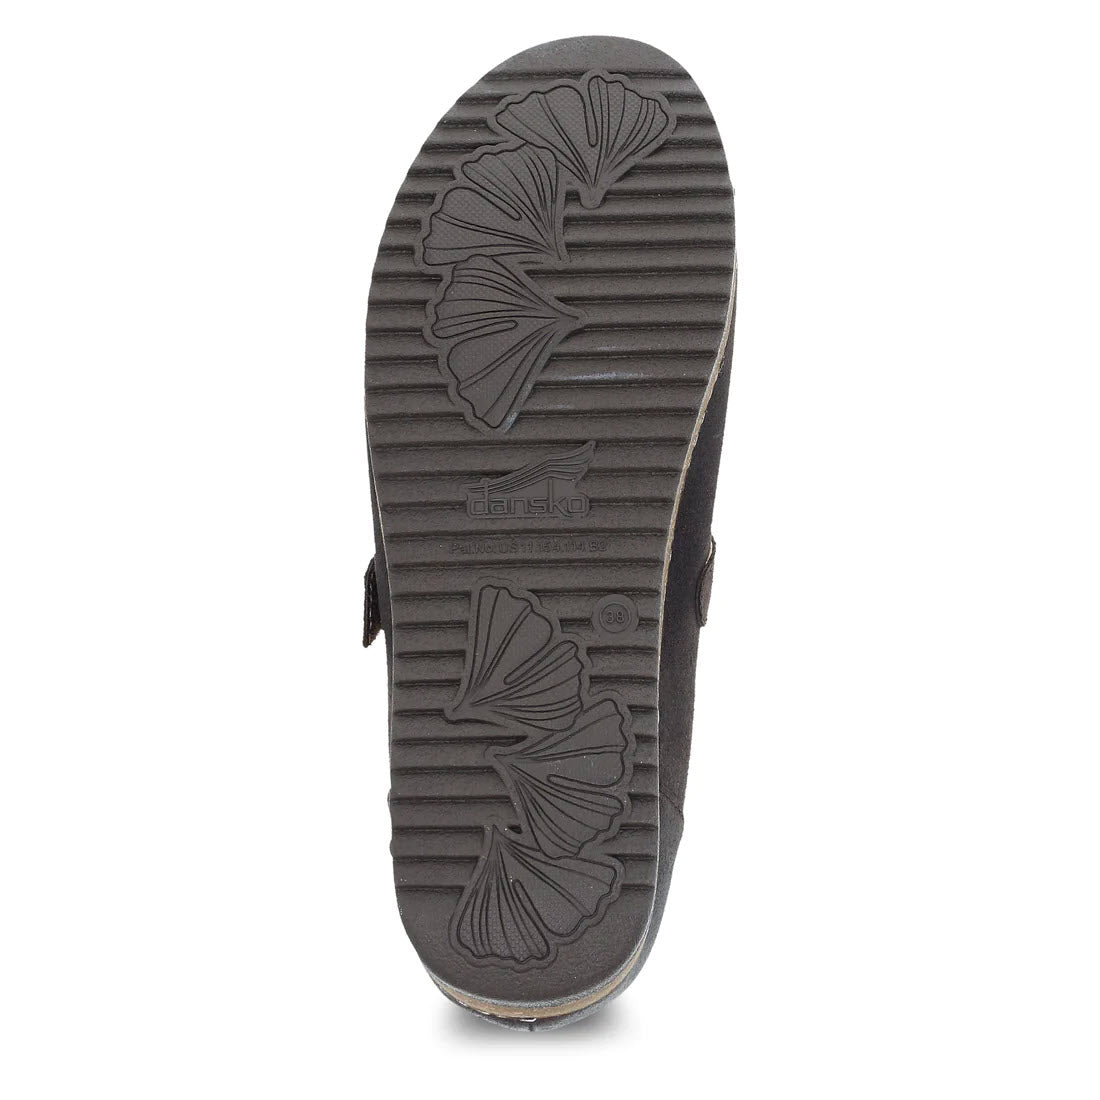 Bottom view of a single Dansko Mika Chocolate Burnished Suede shoe displaying a textured sole with brand name &quot;Dansko&quot; embossed in the center.